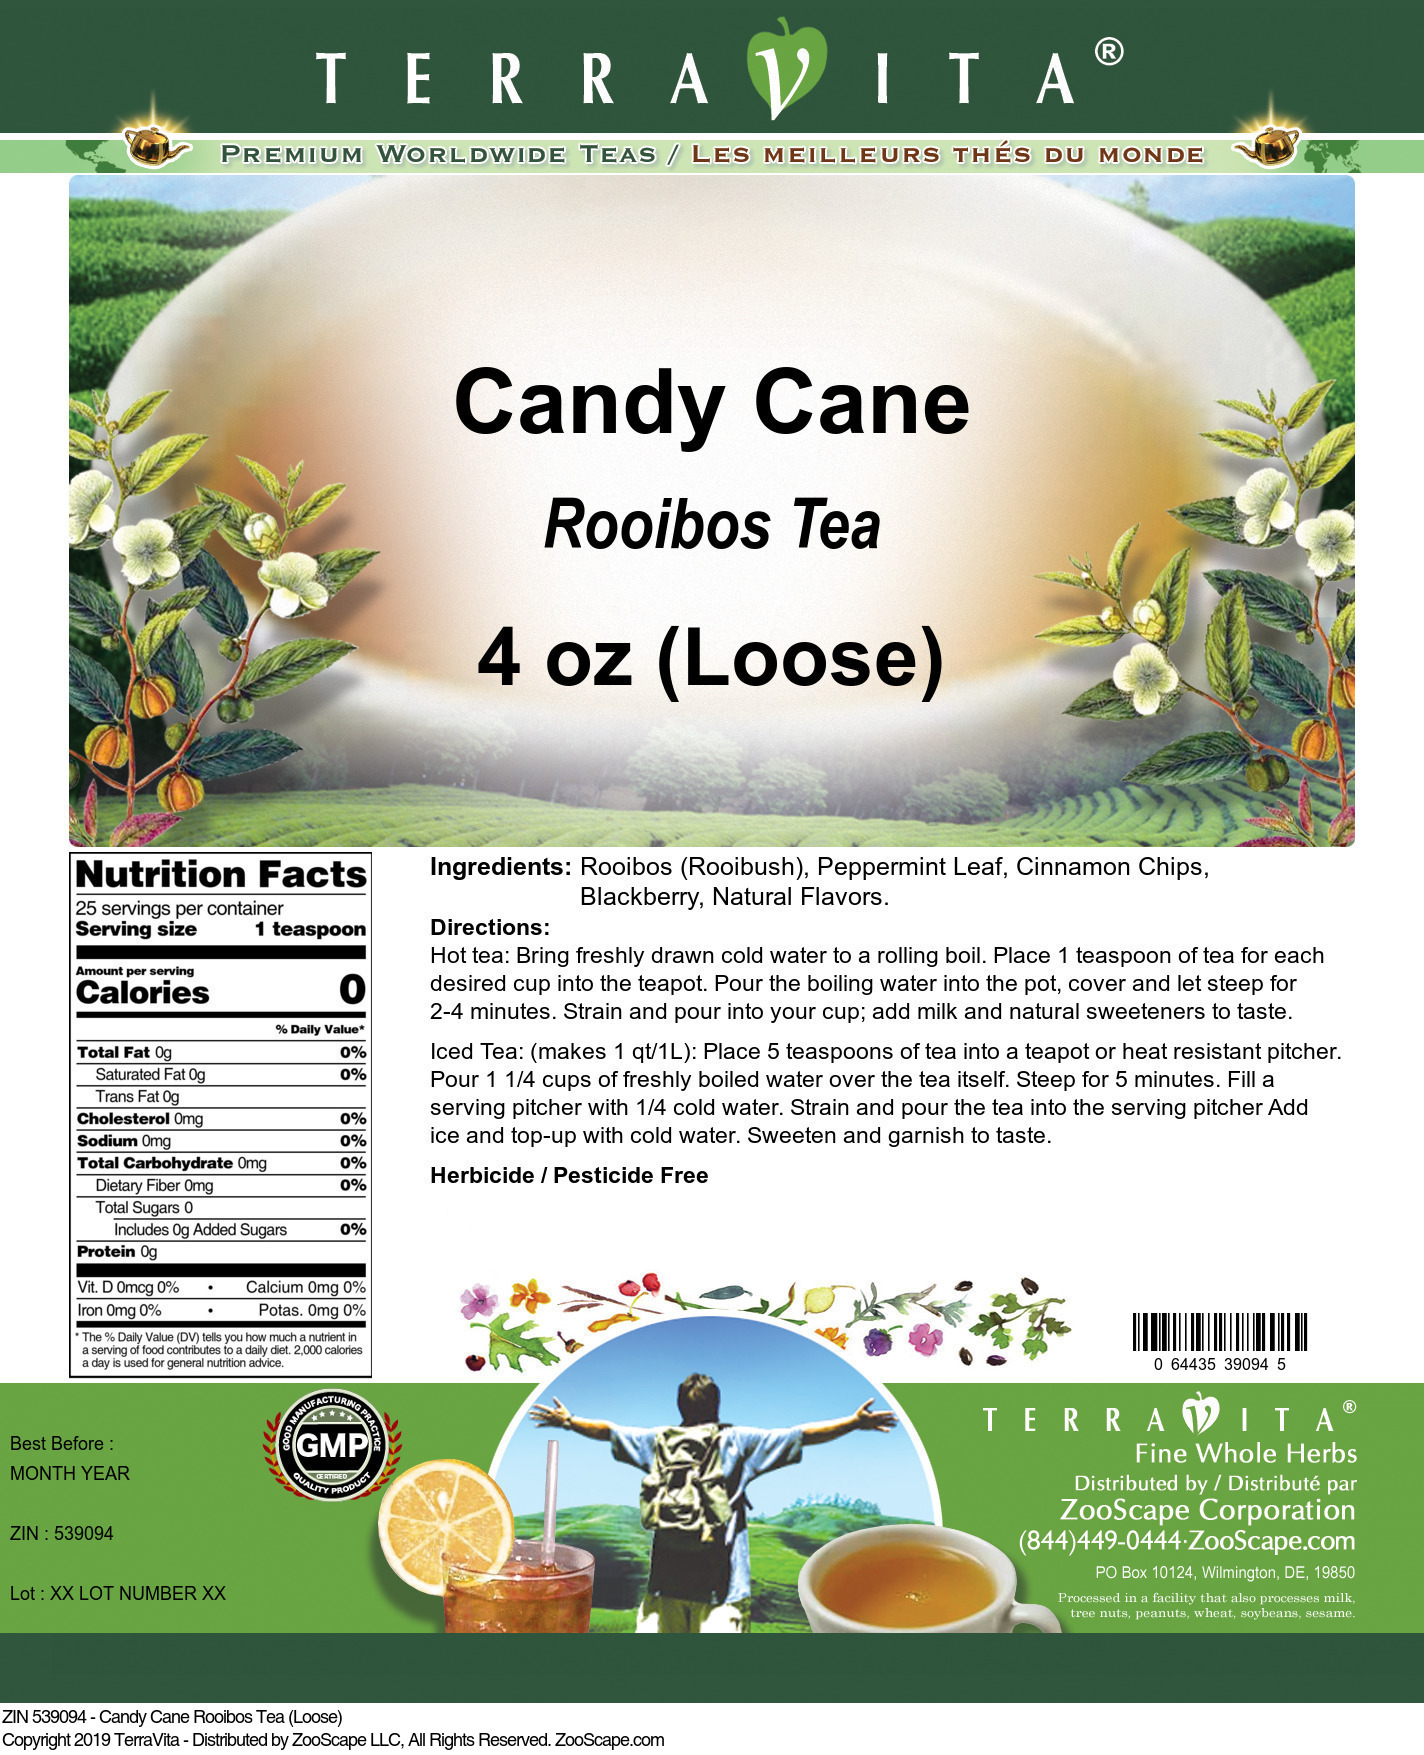 Candy Cane Rooibos Tea (Loose) - Label